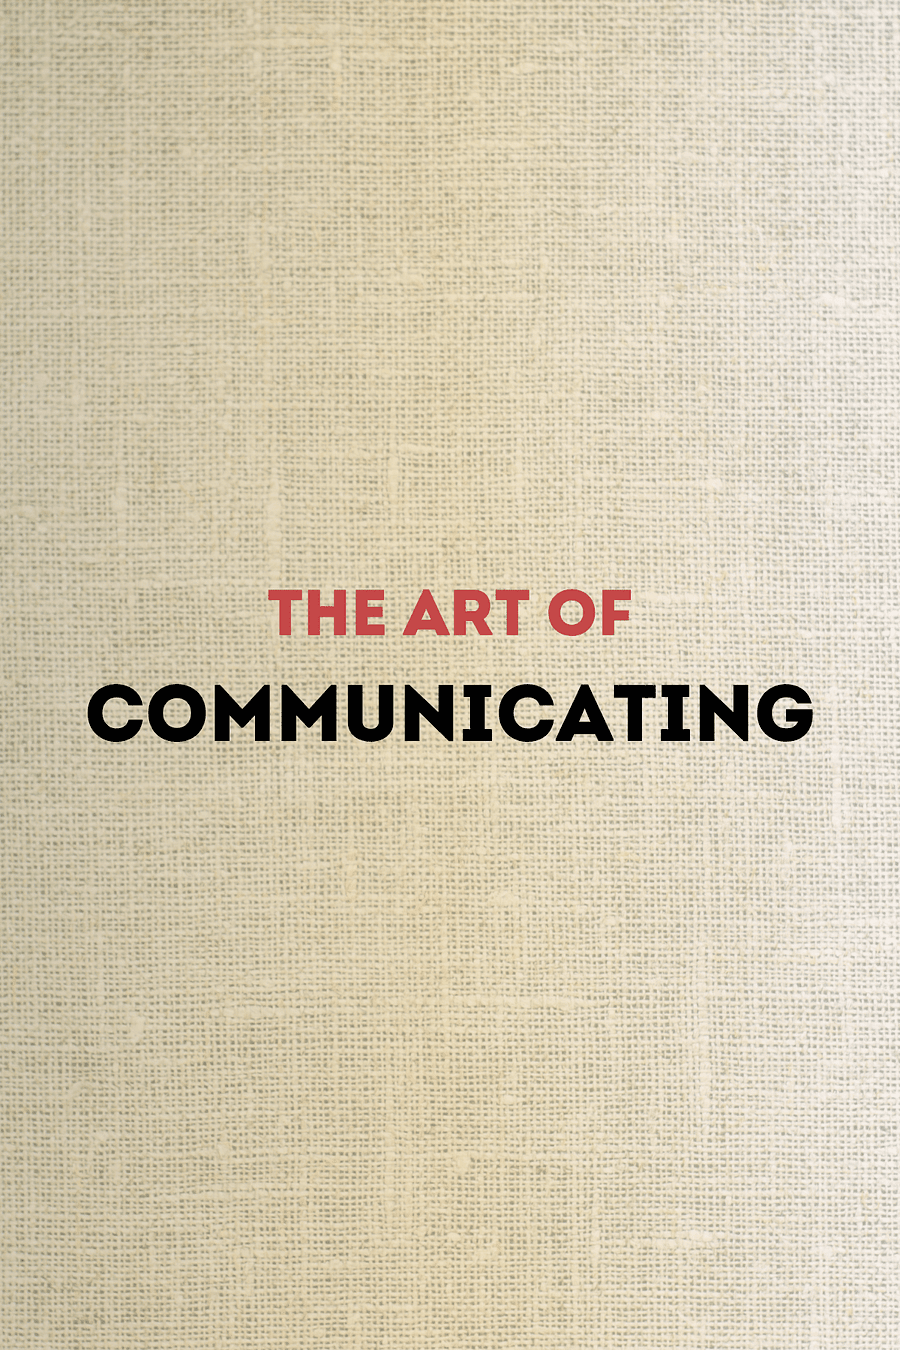 The Art of Communicating by Thich Nhat Hanh - Book Summary